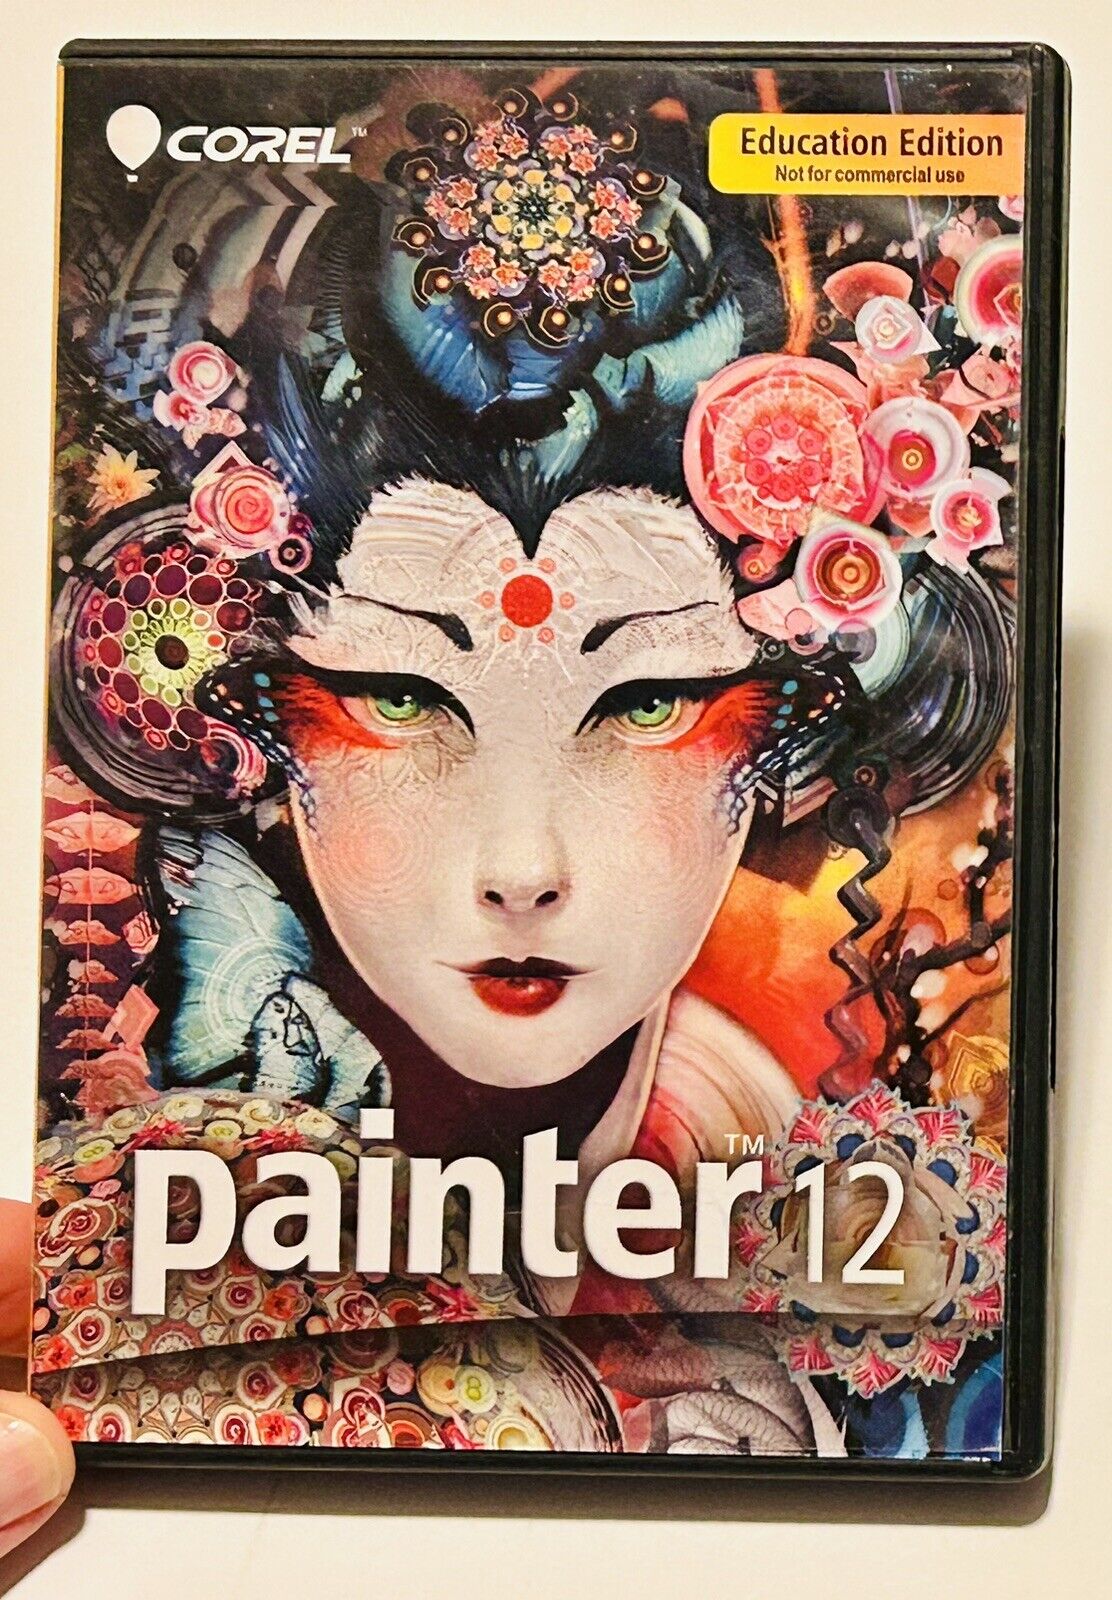 Corel Painter 12 for Windows (Education Edition) With Serial Number 